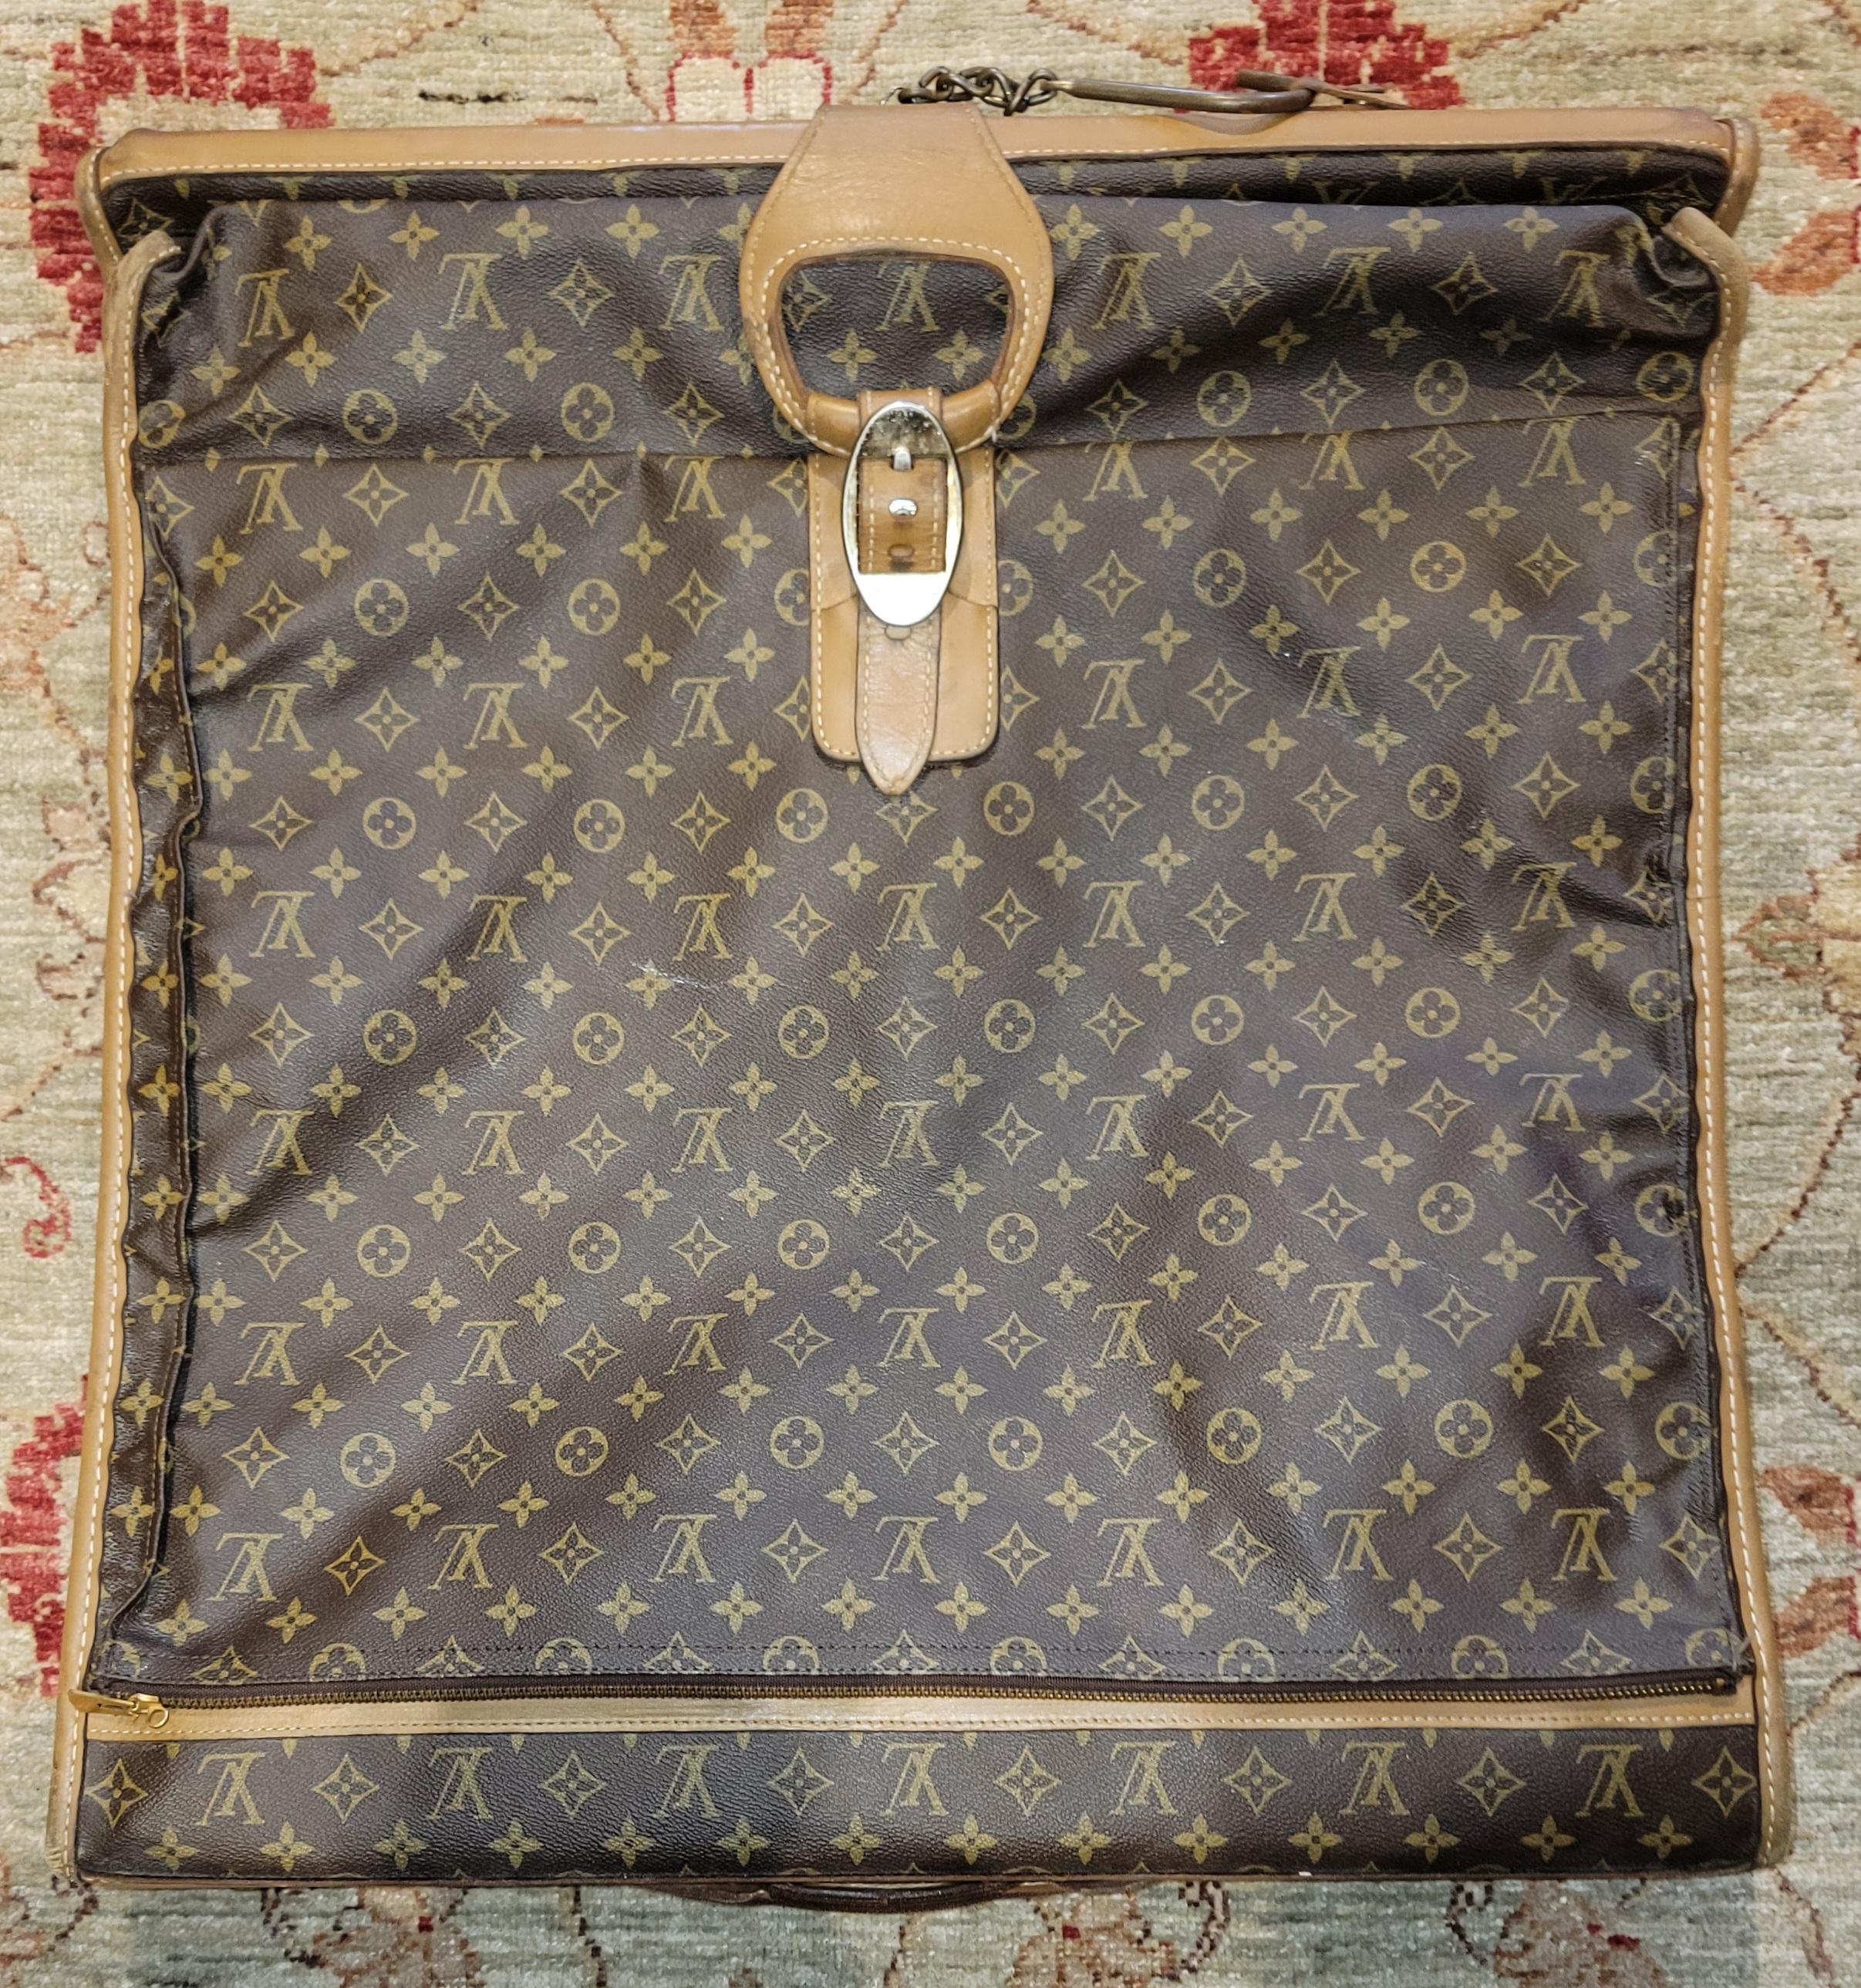 Louis Vuitton Monogram Garment Luggage Carrying Bag. There is a hook on the bottom of the bag when opened can hang in a closet. Easily opened and cloths exposed when laying down to pull cothes out. This is a vintage used carrying bag.  50h x 23.5w x